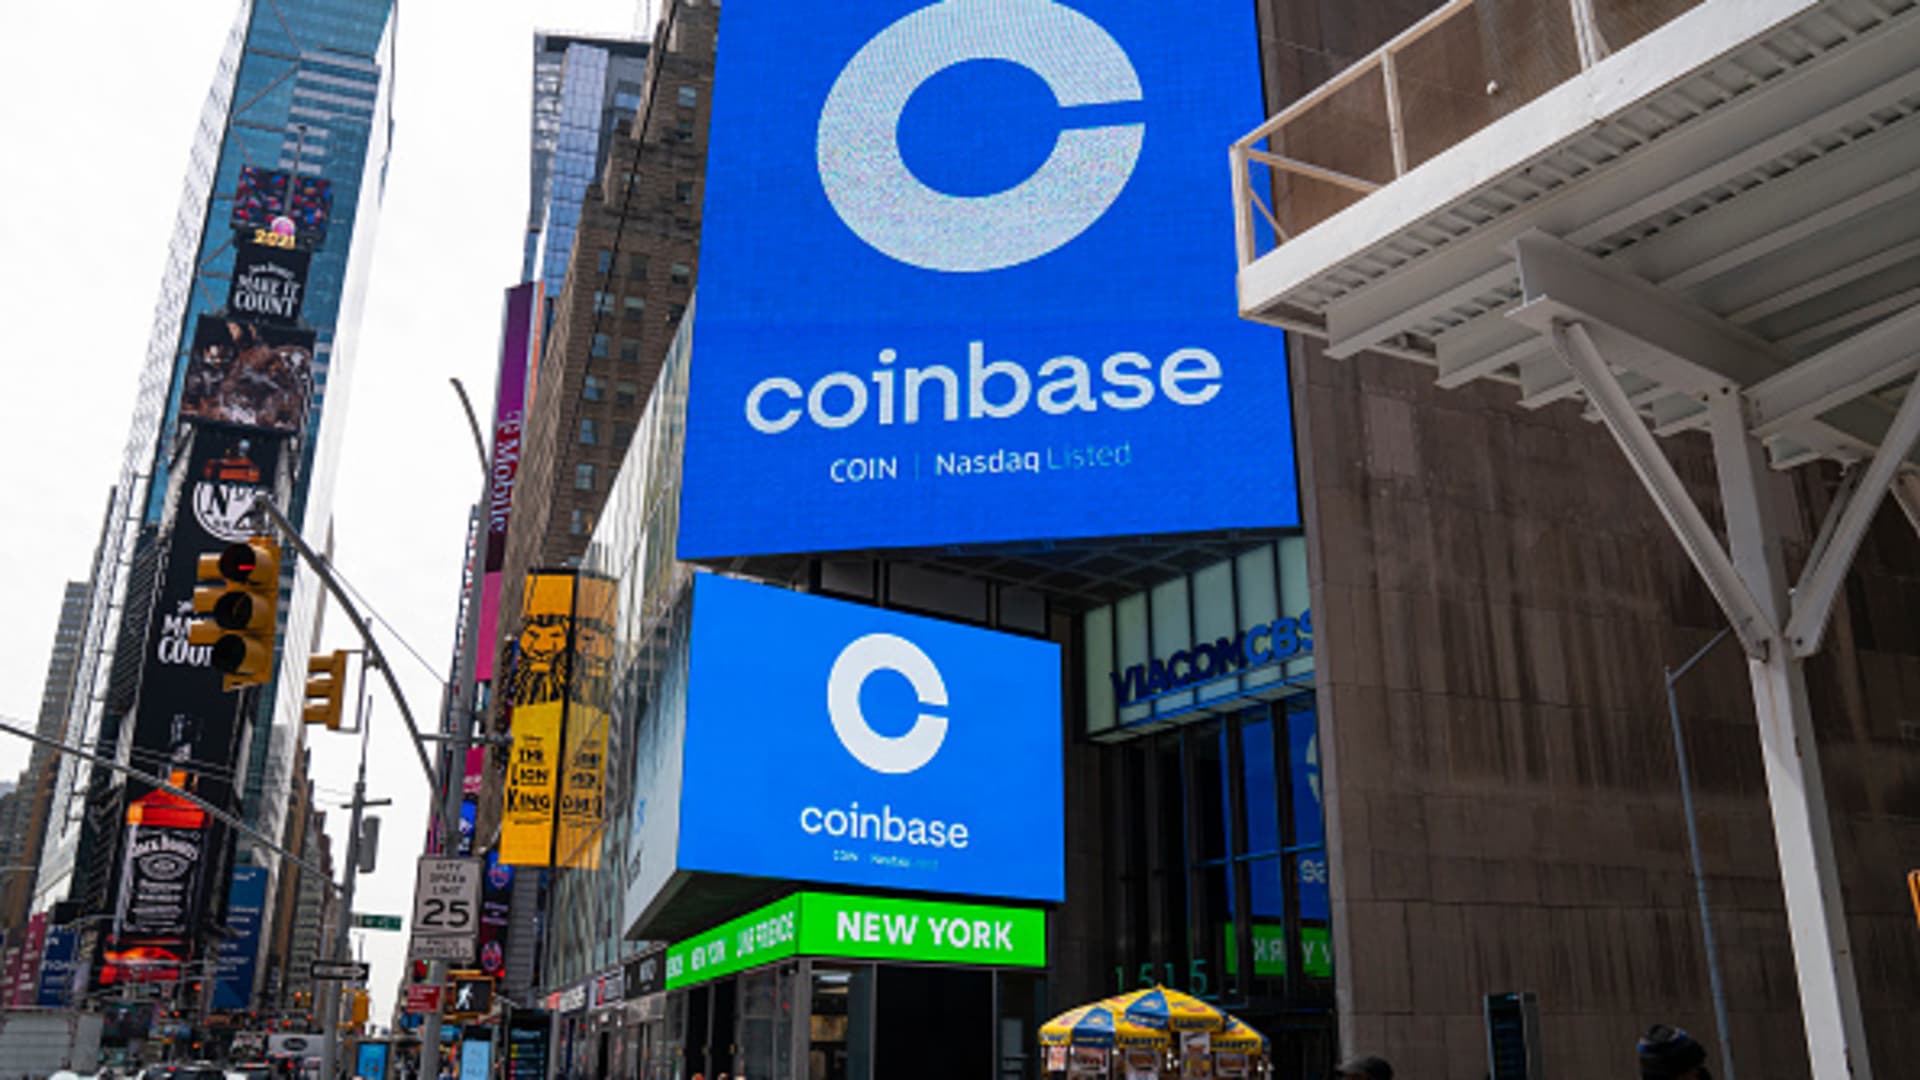 Coinbase settles with New York state financial regulator for 0 million, stock spikes